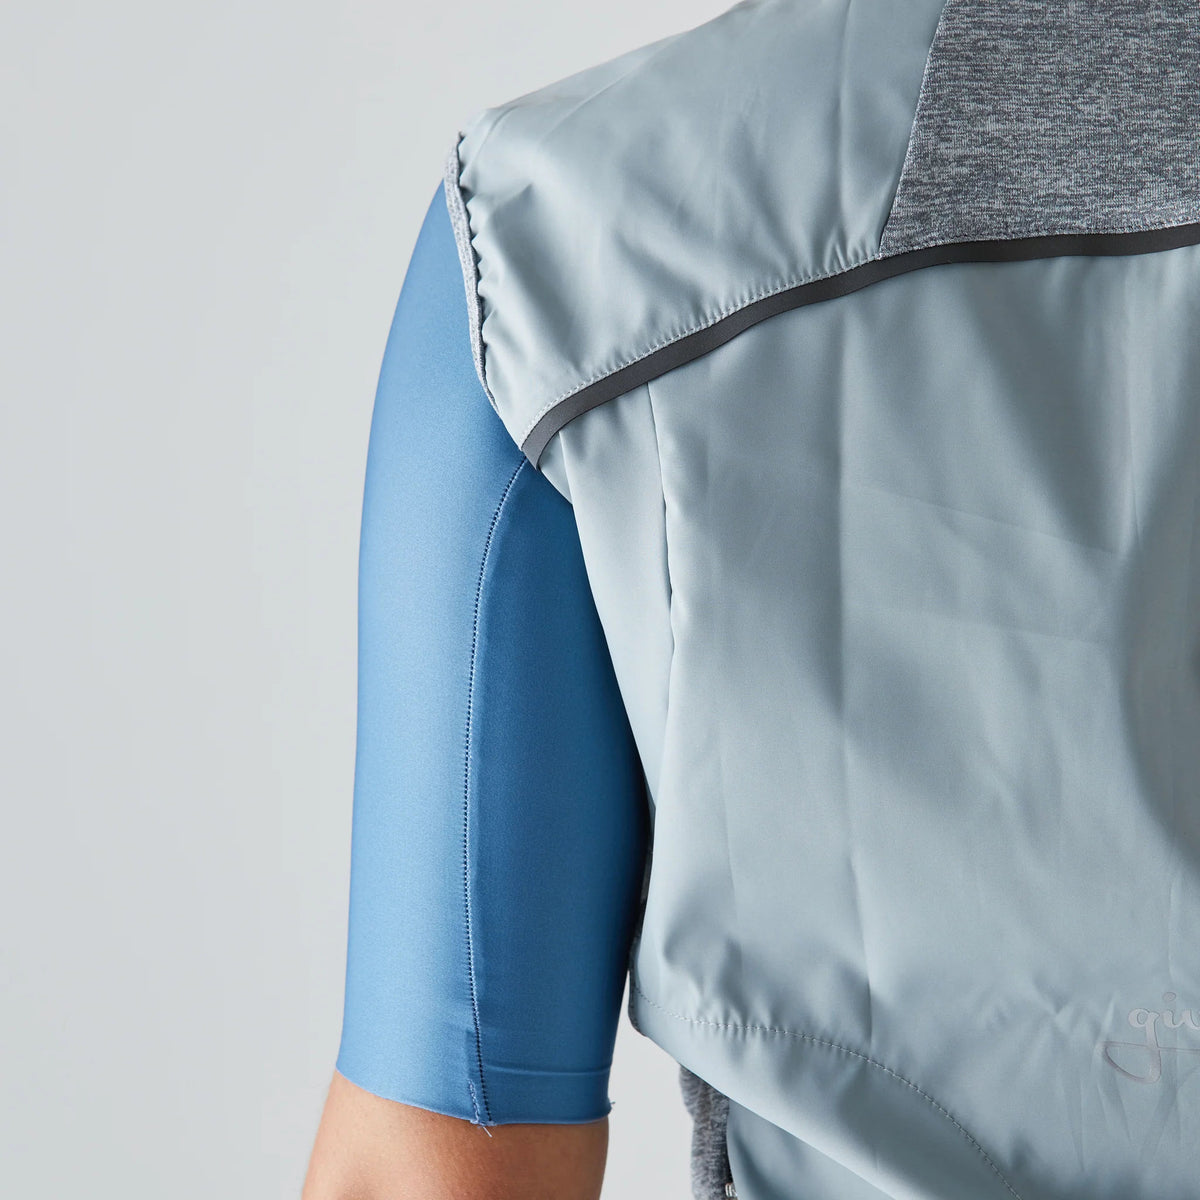 Givelo Quick-Free Gilet Grey レディース サイクルジレ | GEARED